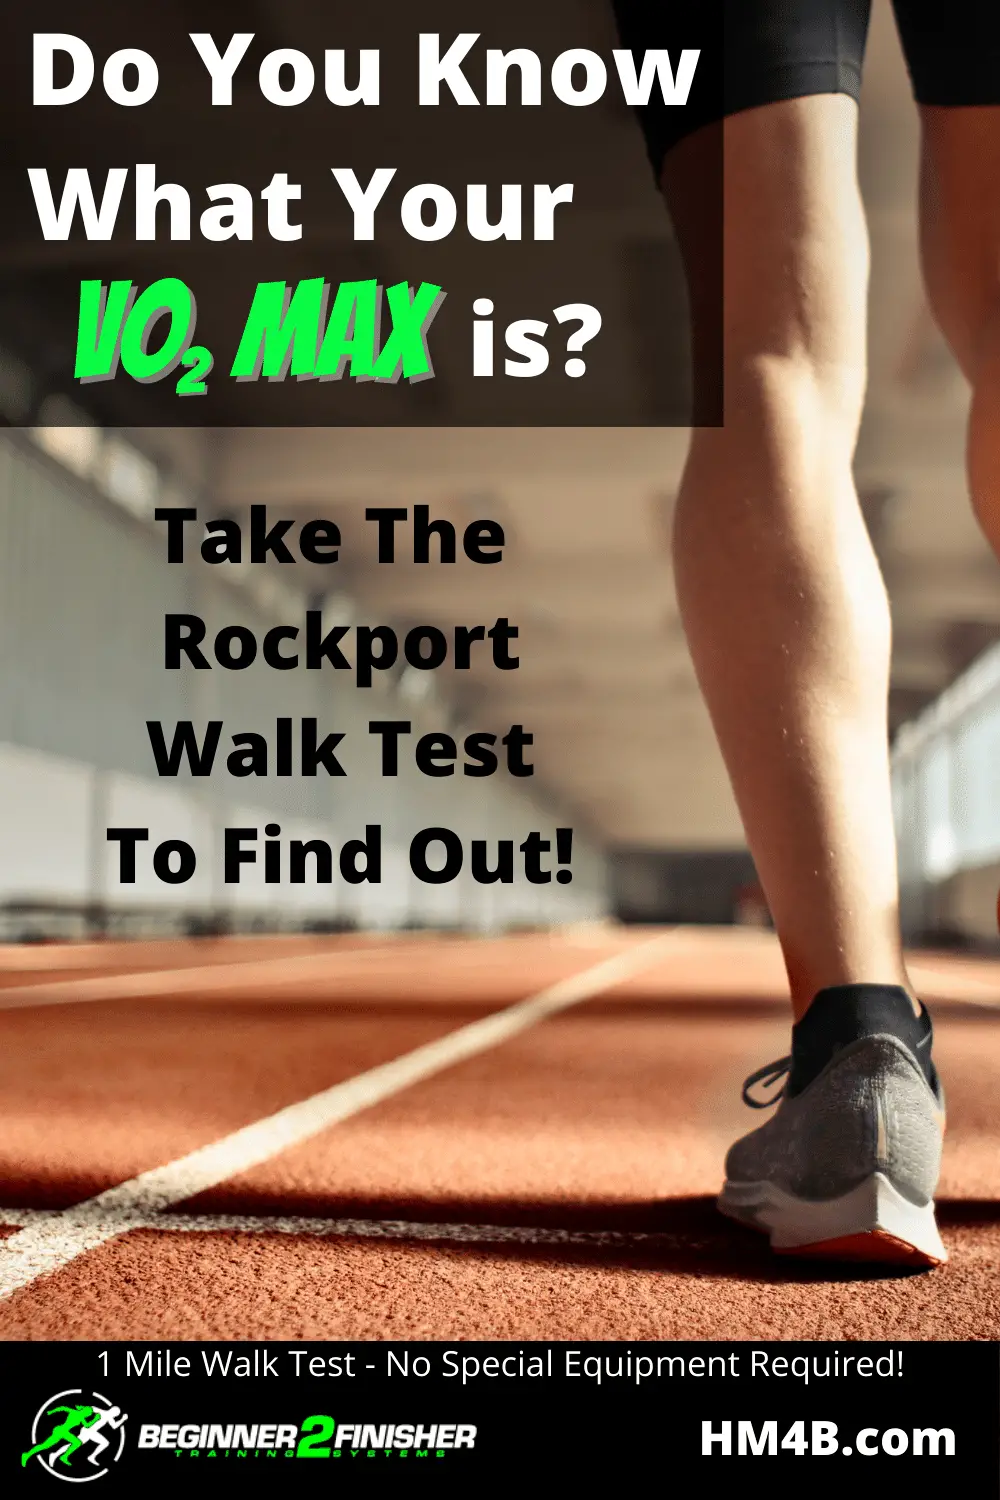 rockport-walk-test-do-you-know-your-vo2-max-pin-half-marathon-for-beginners